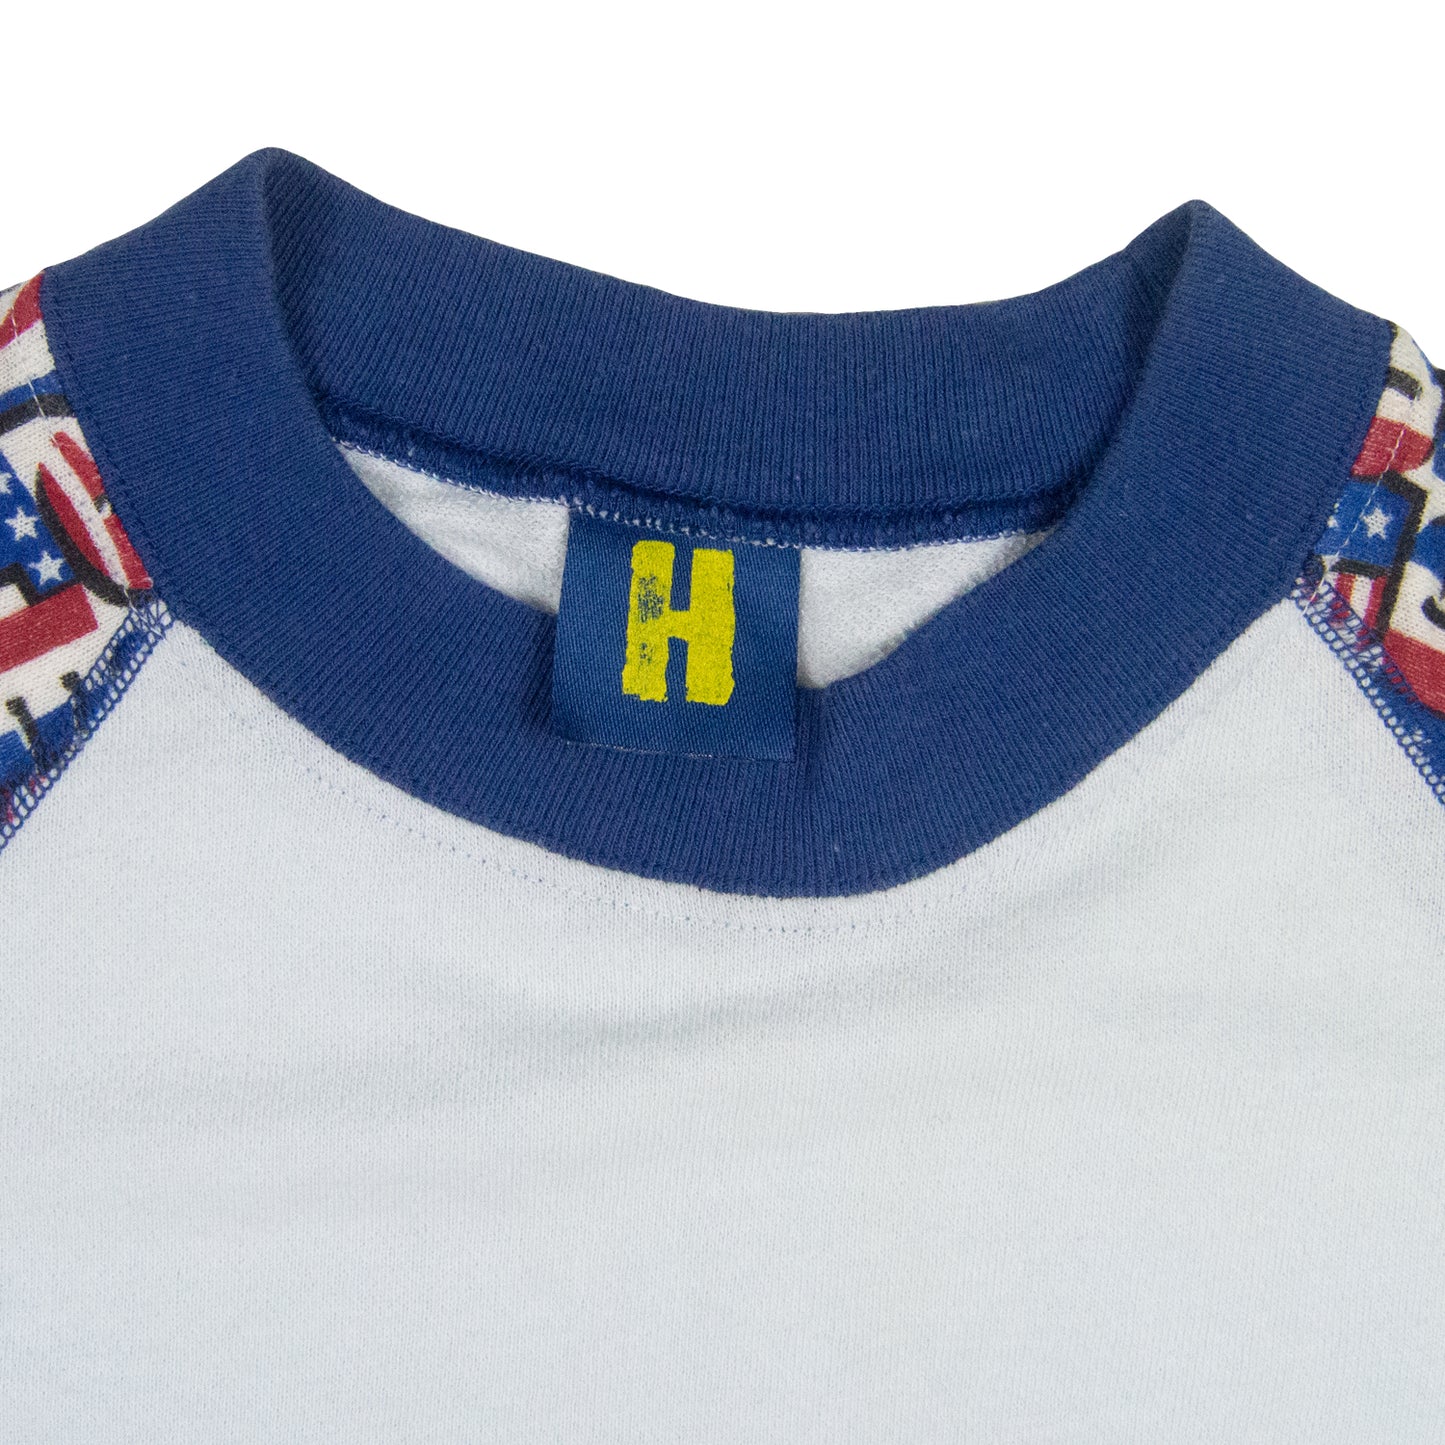 Hysteric Glamour Americana Logo French Terry Ringer Tee